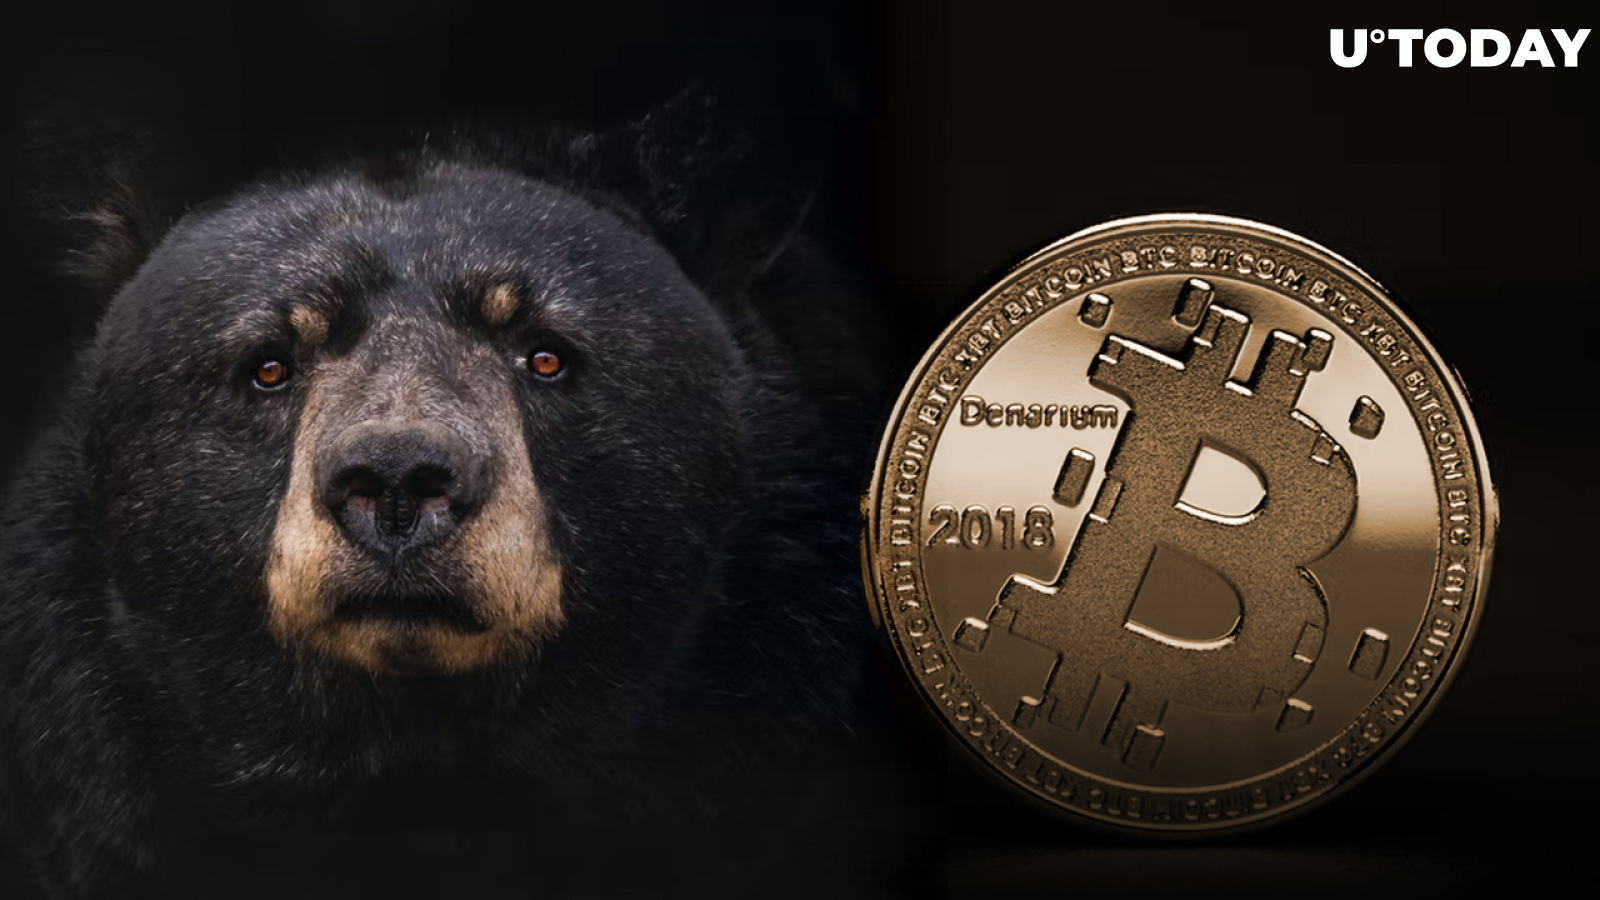 Bitcoin Signals This Familiar Trend Typical of Bear Markets: Details